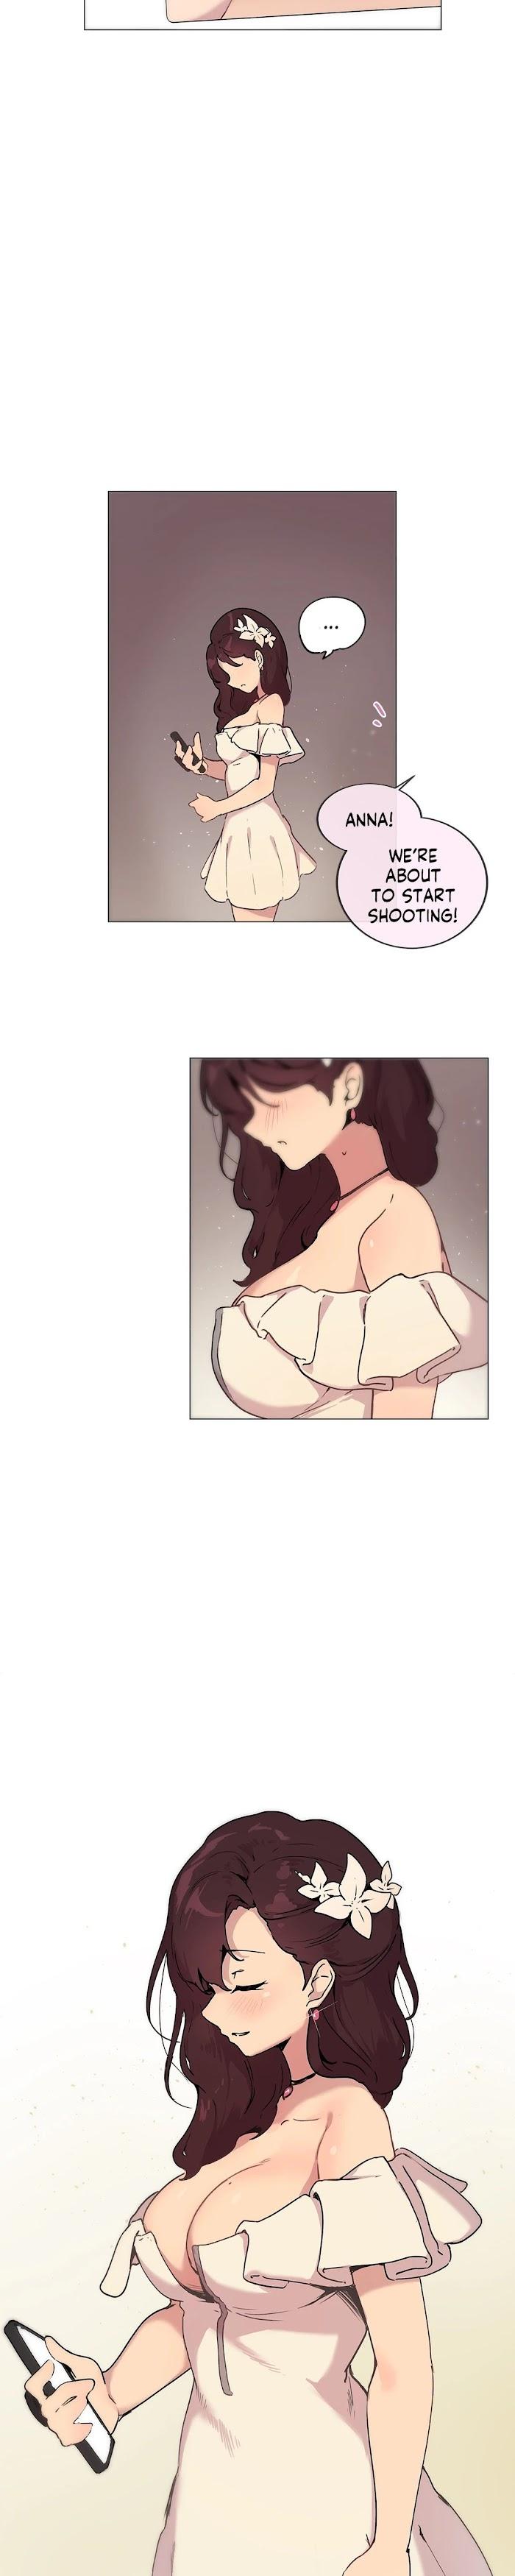 [Dumangoon, 130F] Sexcape Room: Wipe Out Ch.9/9 [English] [Manhwa PDF] Completed 129